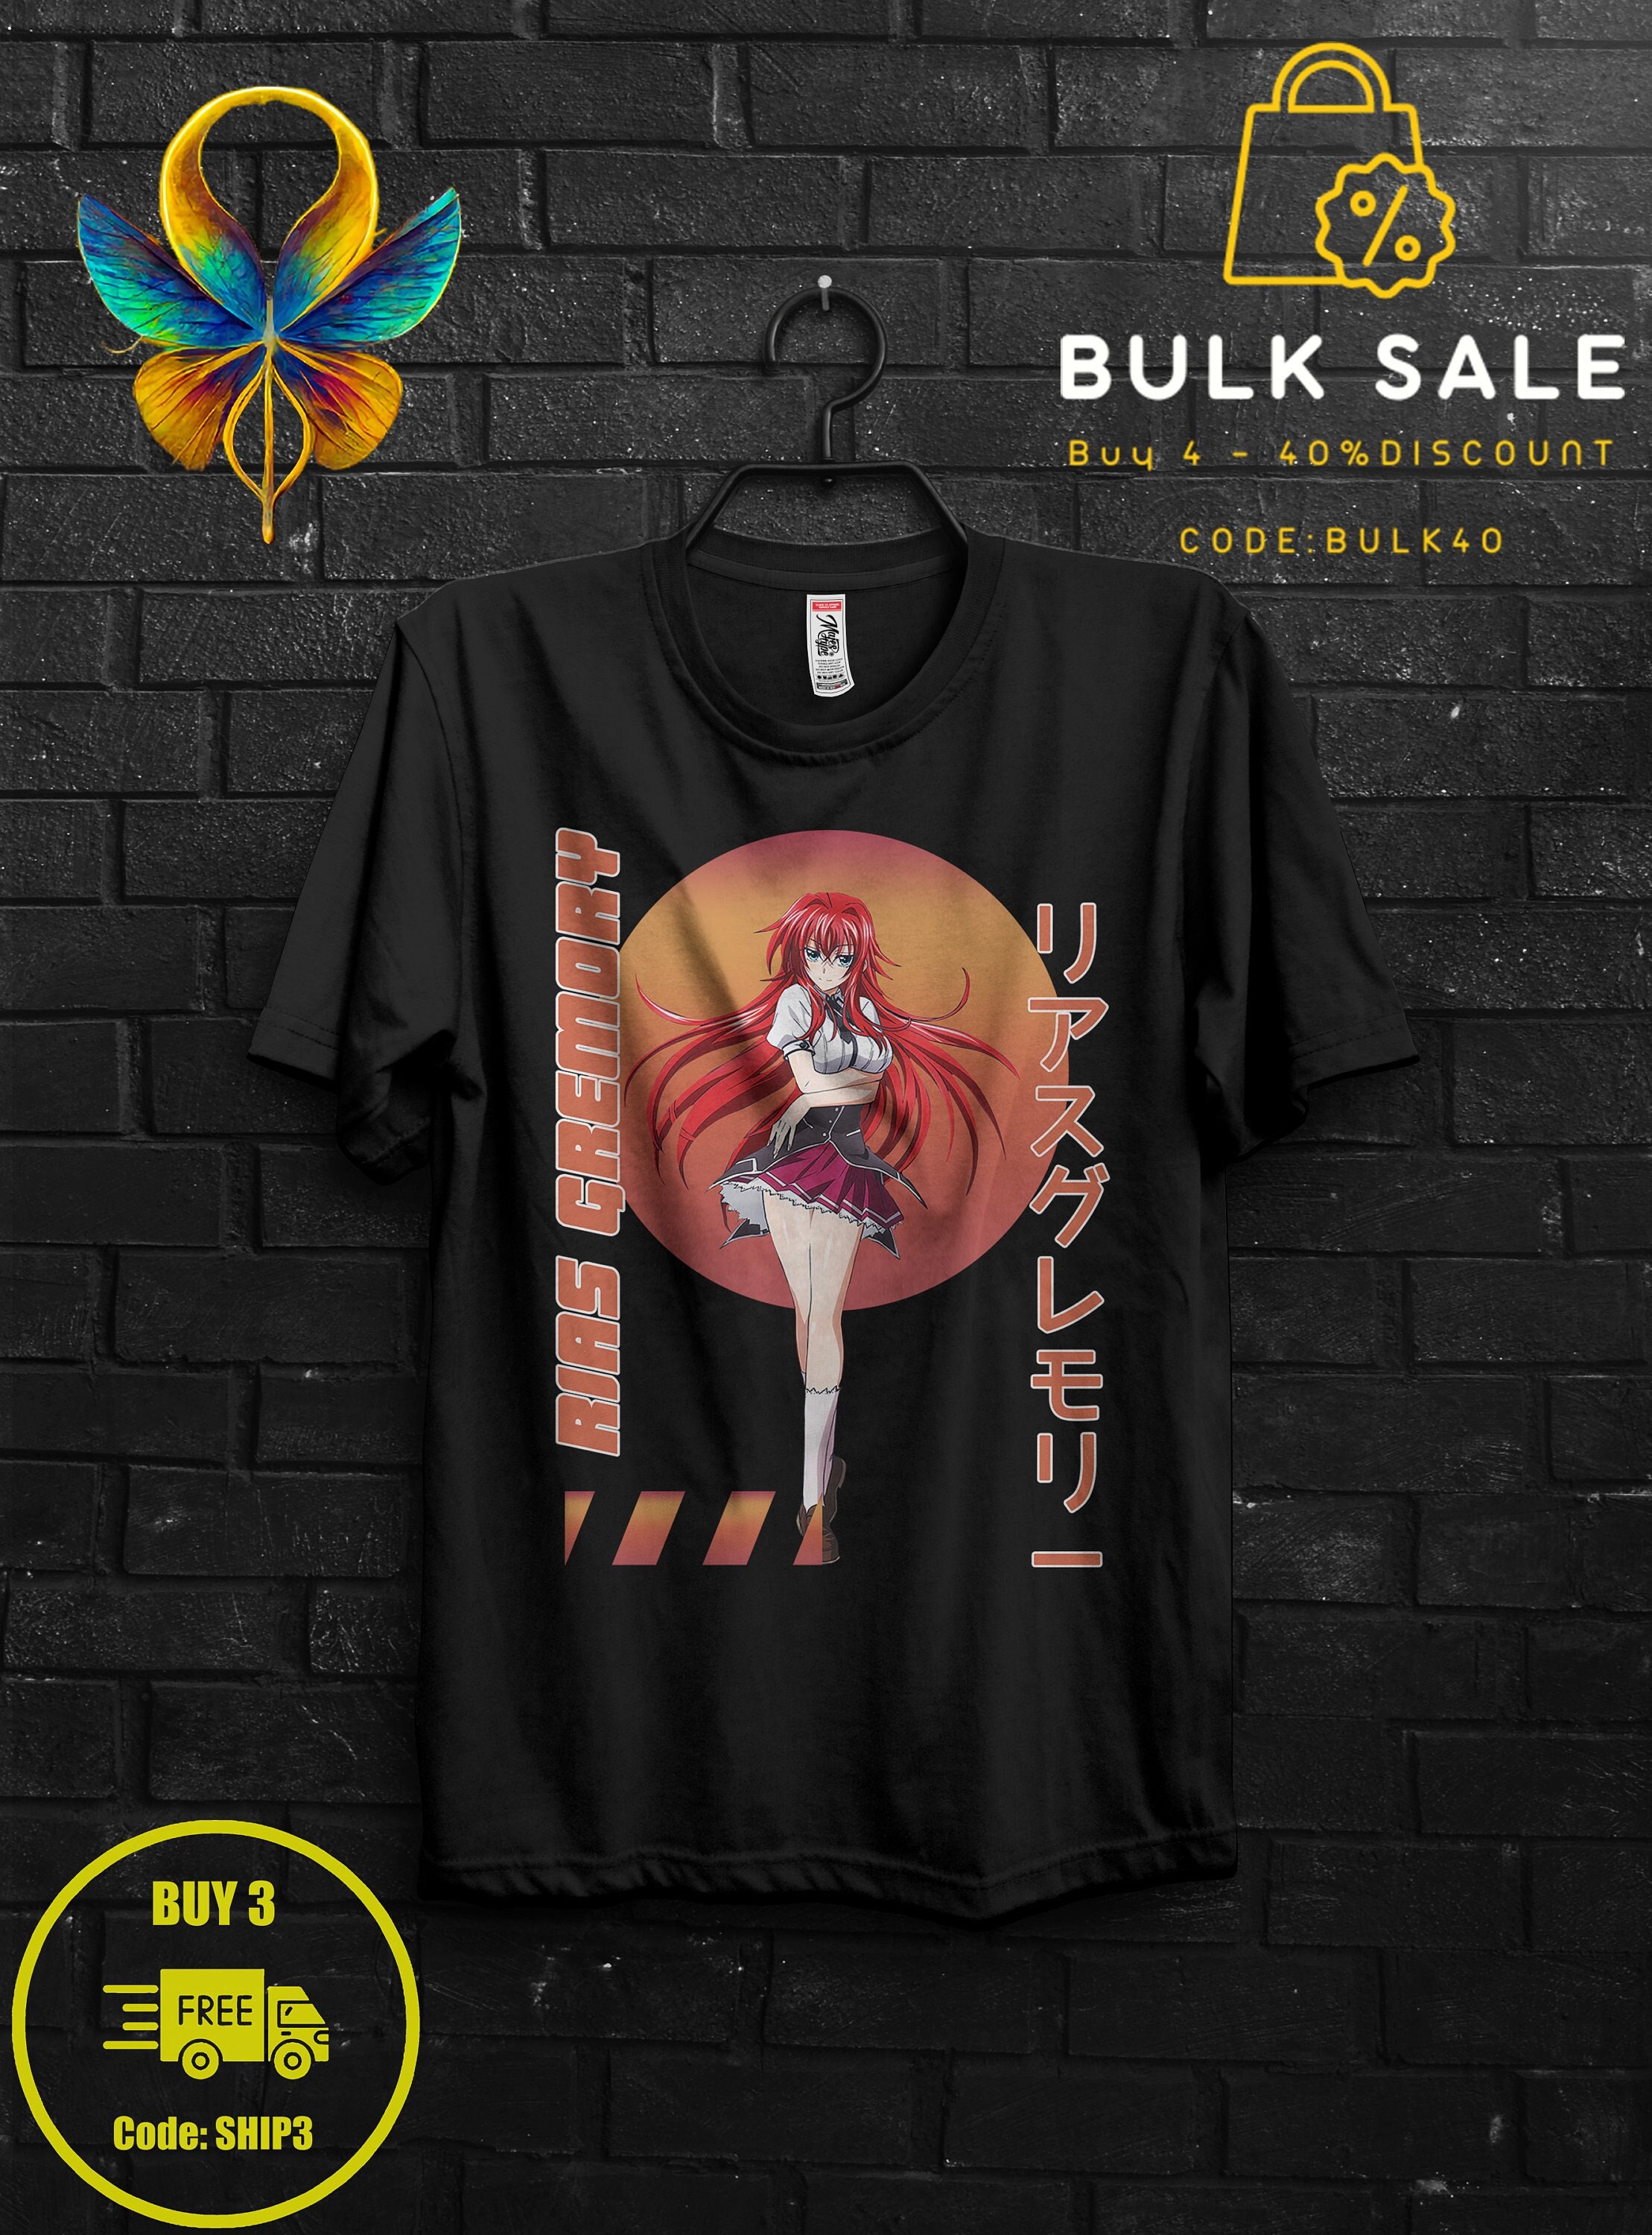 Rias Gremory Shirt Anime Gift Cosplay For Girl,Xenovia Appareal For Sitri,Issei Hyoudou Sweat,High School DxD Tee,Rossweisse Tshirt For Her 1600255893